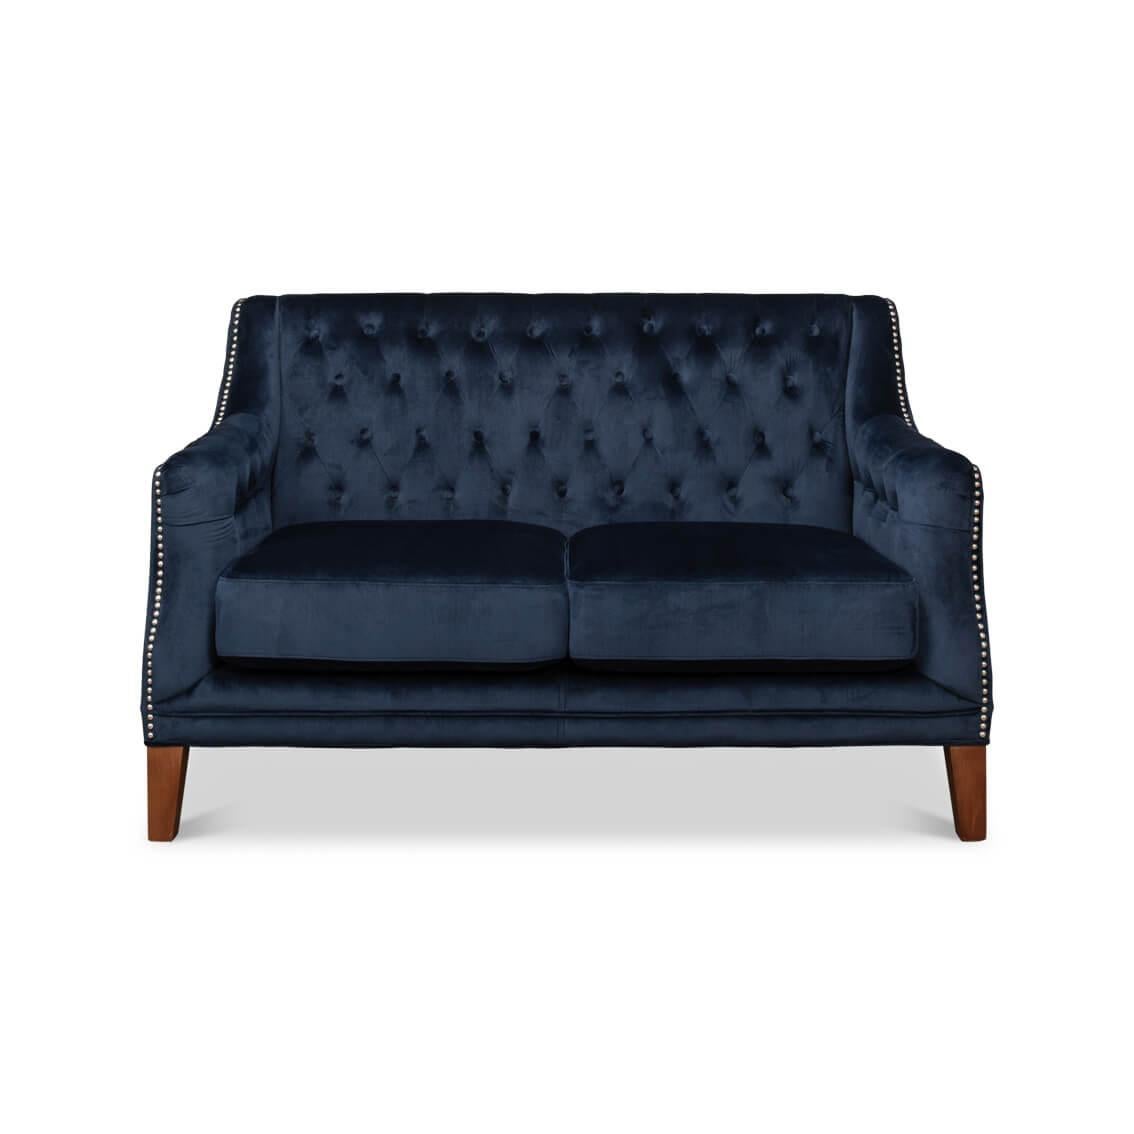 Draped in sumptuous navy blue velvet, this loveseat features classic deep button tufting that creates a sophisticated diamond pattern.

The graceful curves of its silhouette are highlighted by tasteful nailhead trim, adding a gleam of silver to the